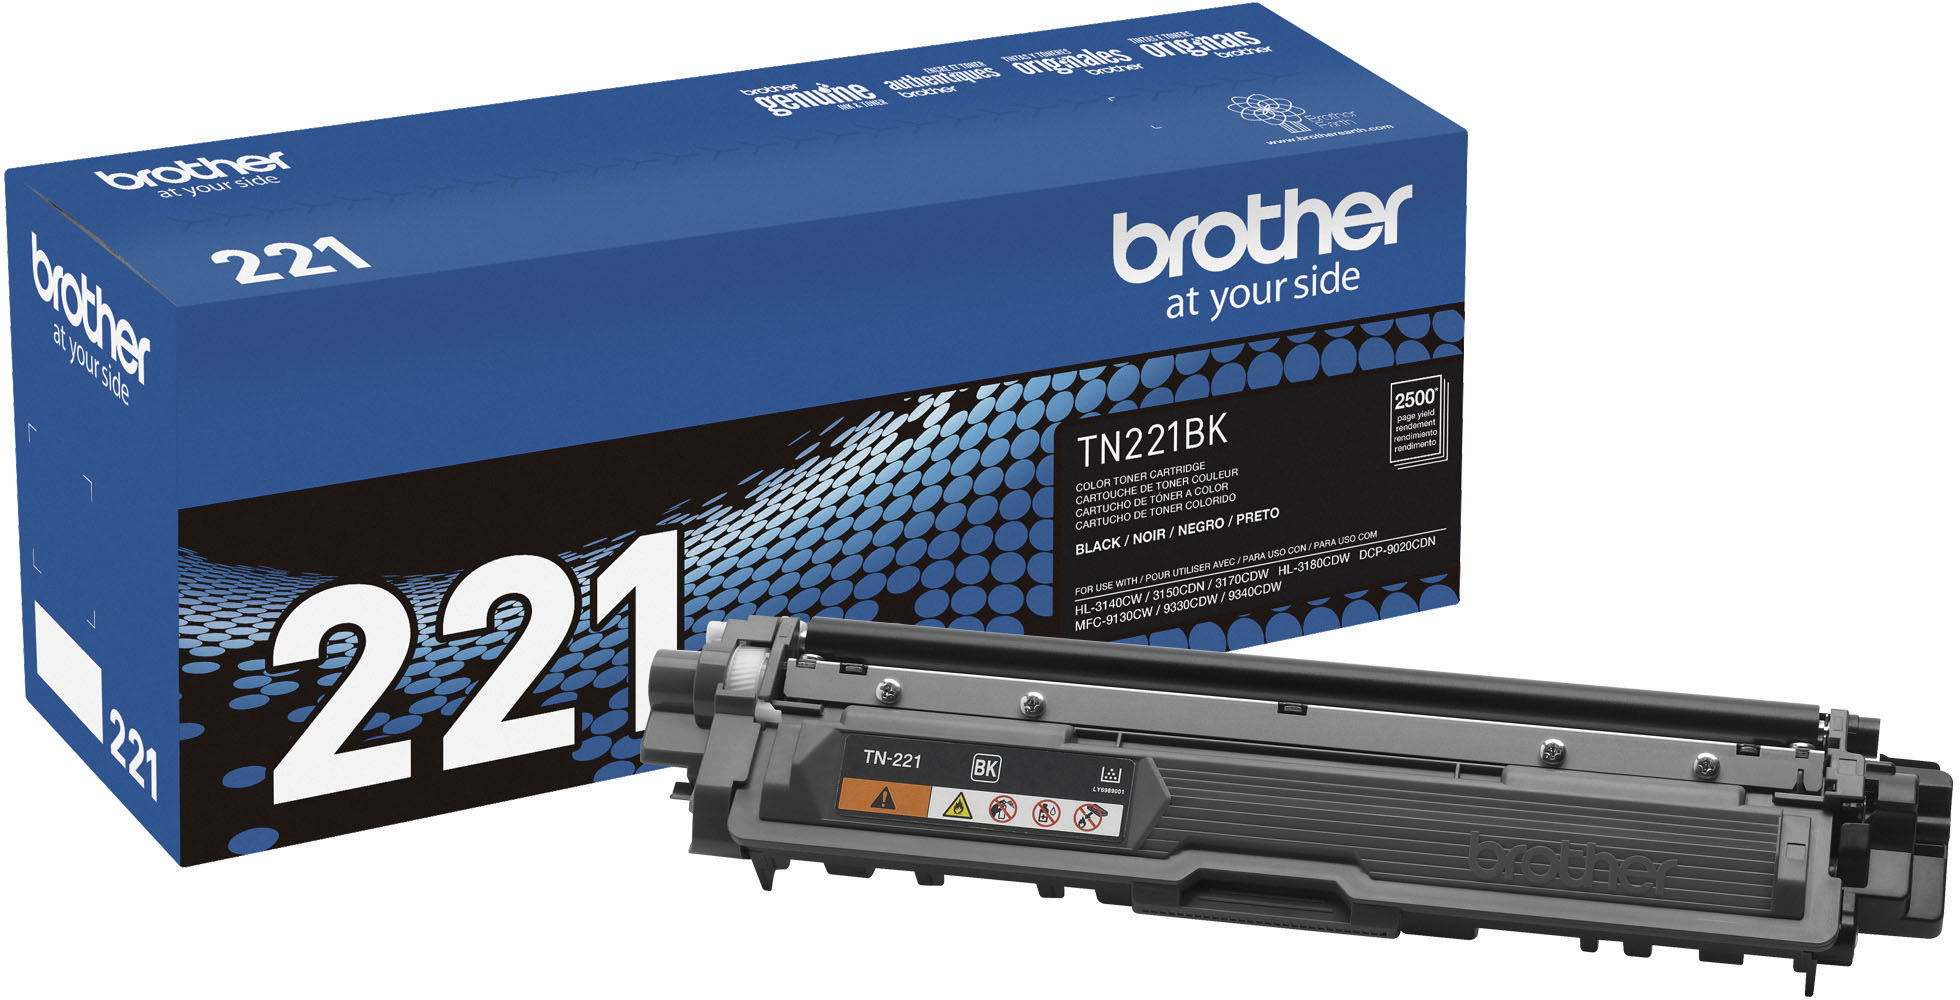 Replacement Black Toner for Brother TN221K, MFC-9330CDW, MFC-9340CDW